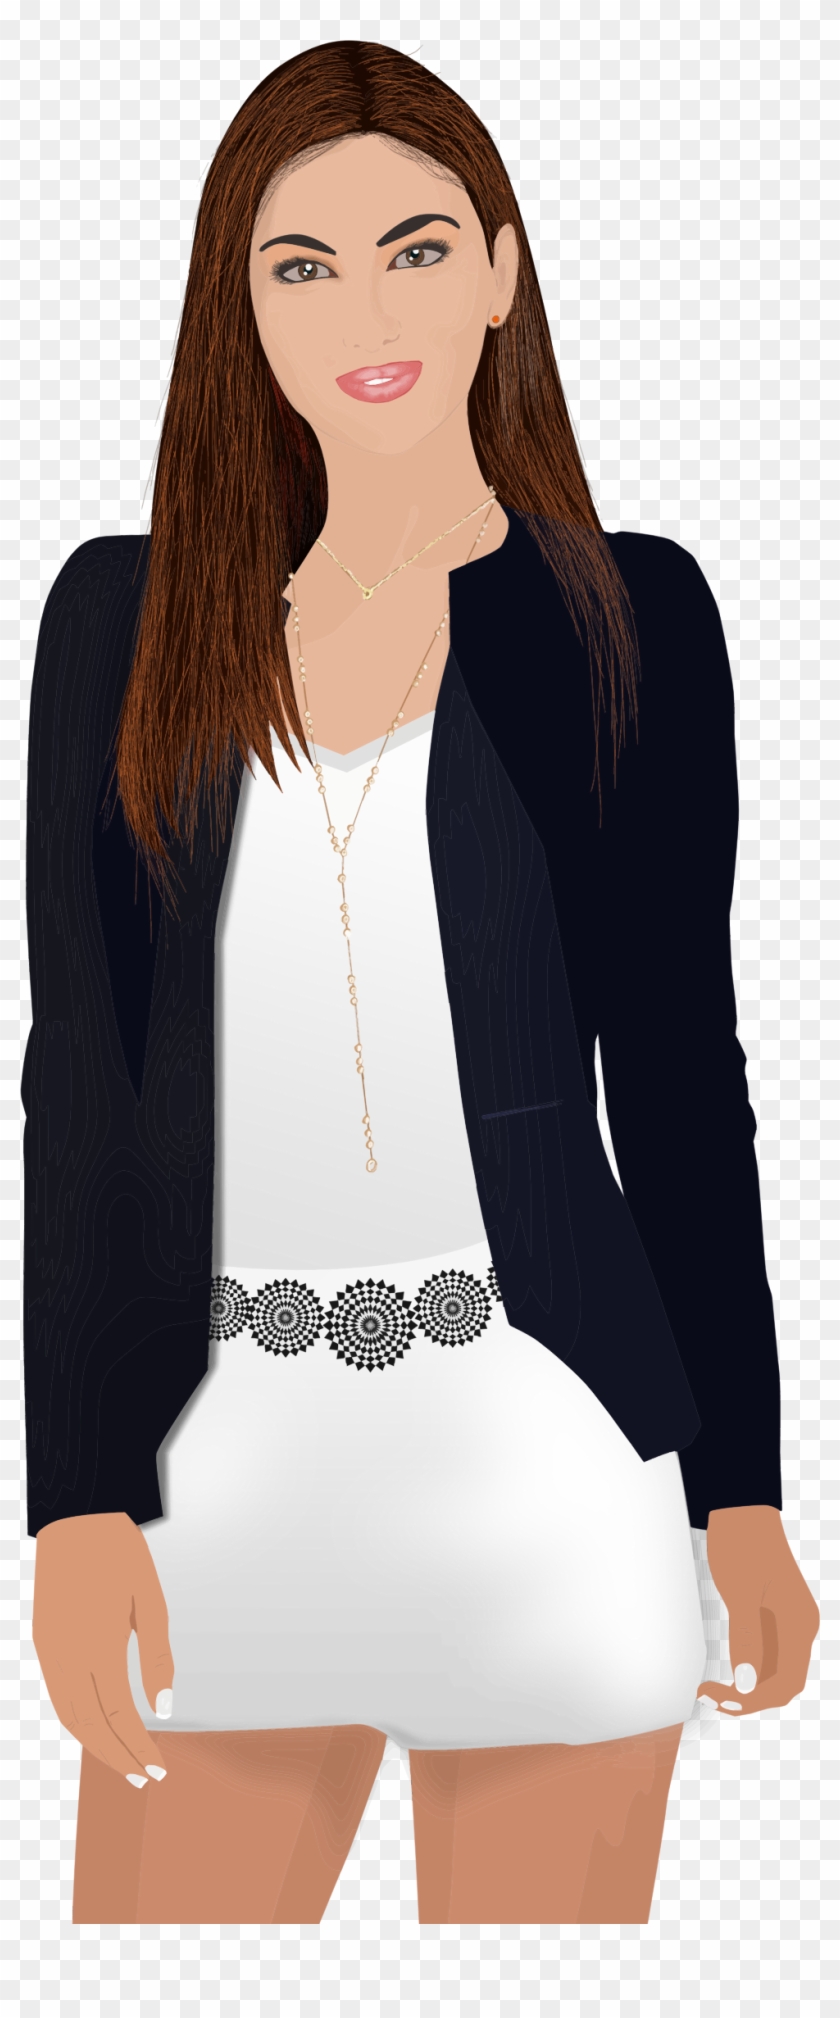 Free - Business Woman Clip Art - Png Download #1465355